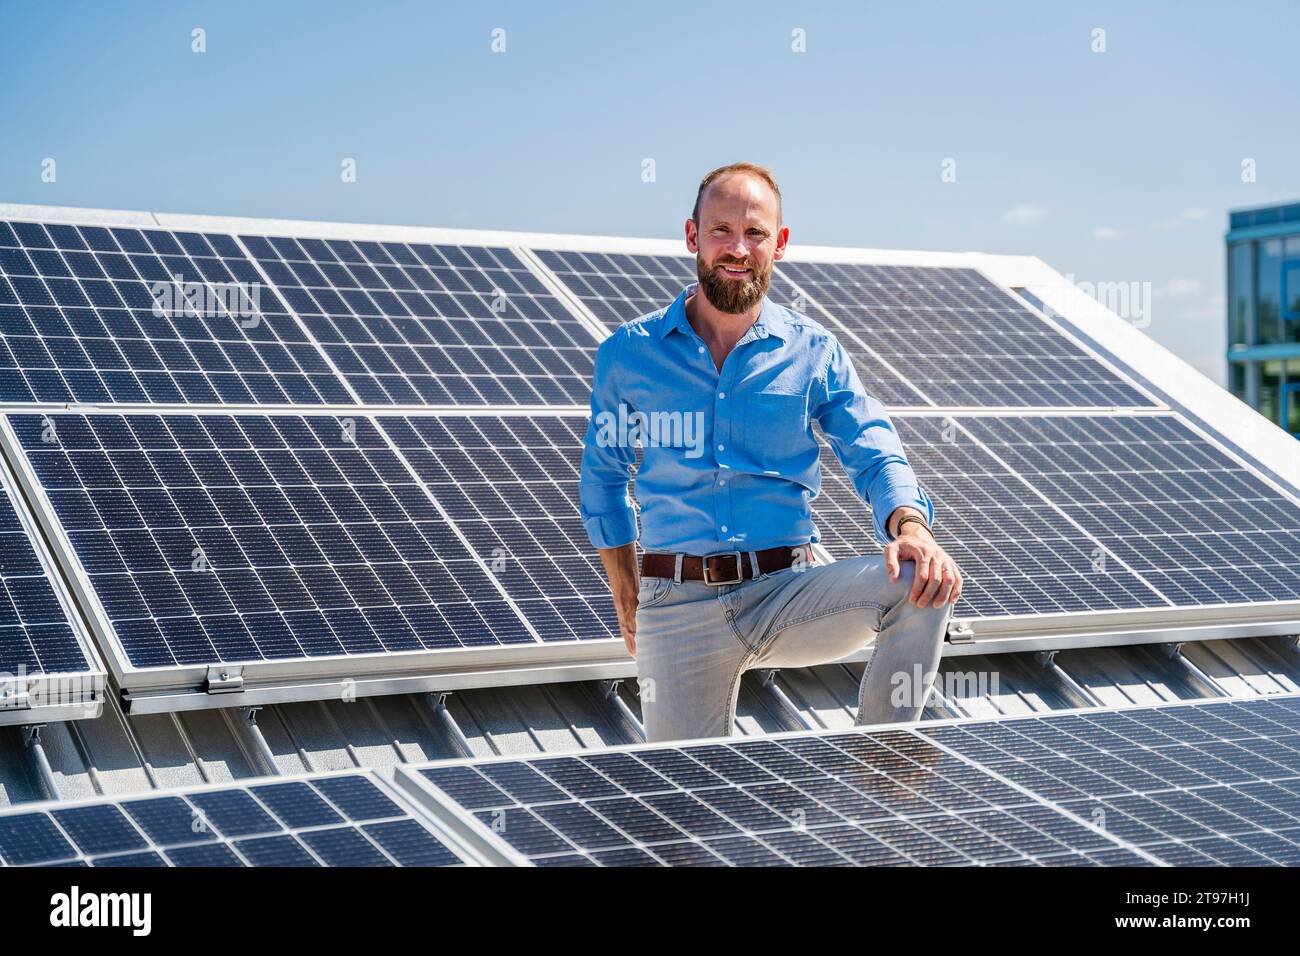 A cheerful businessman stands surrounded by solar panels, showcasing his commitment to sustainable energy Stock Photo